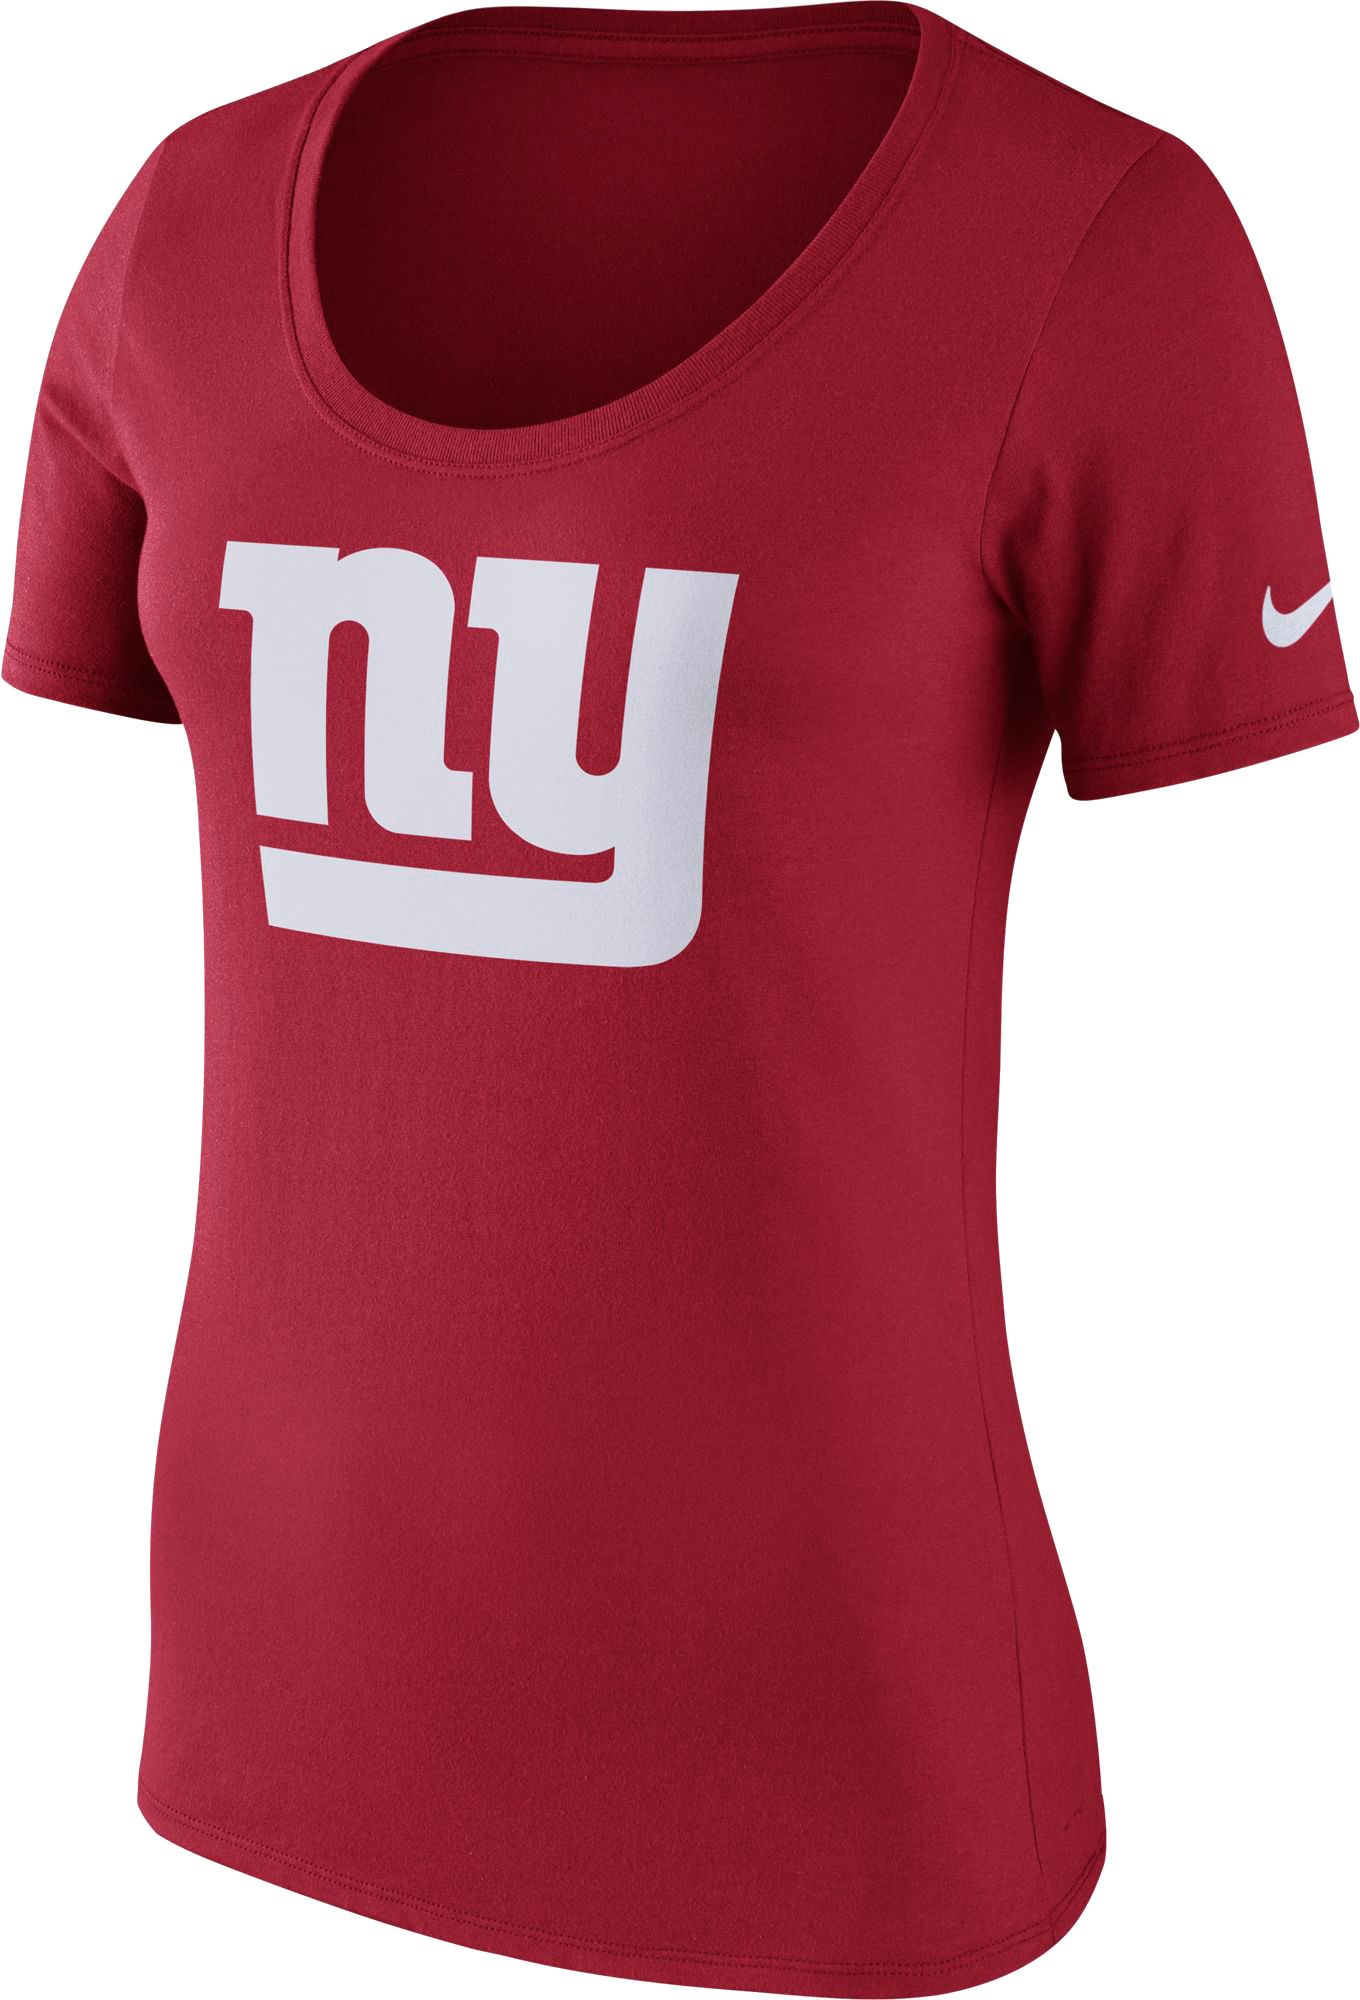 red ny giants jersey